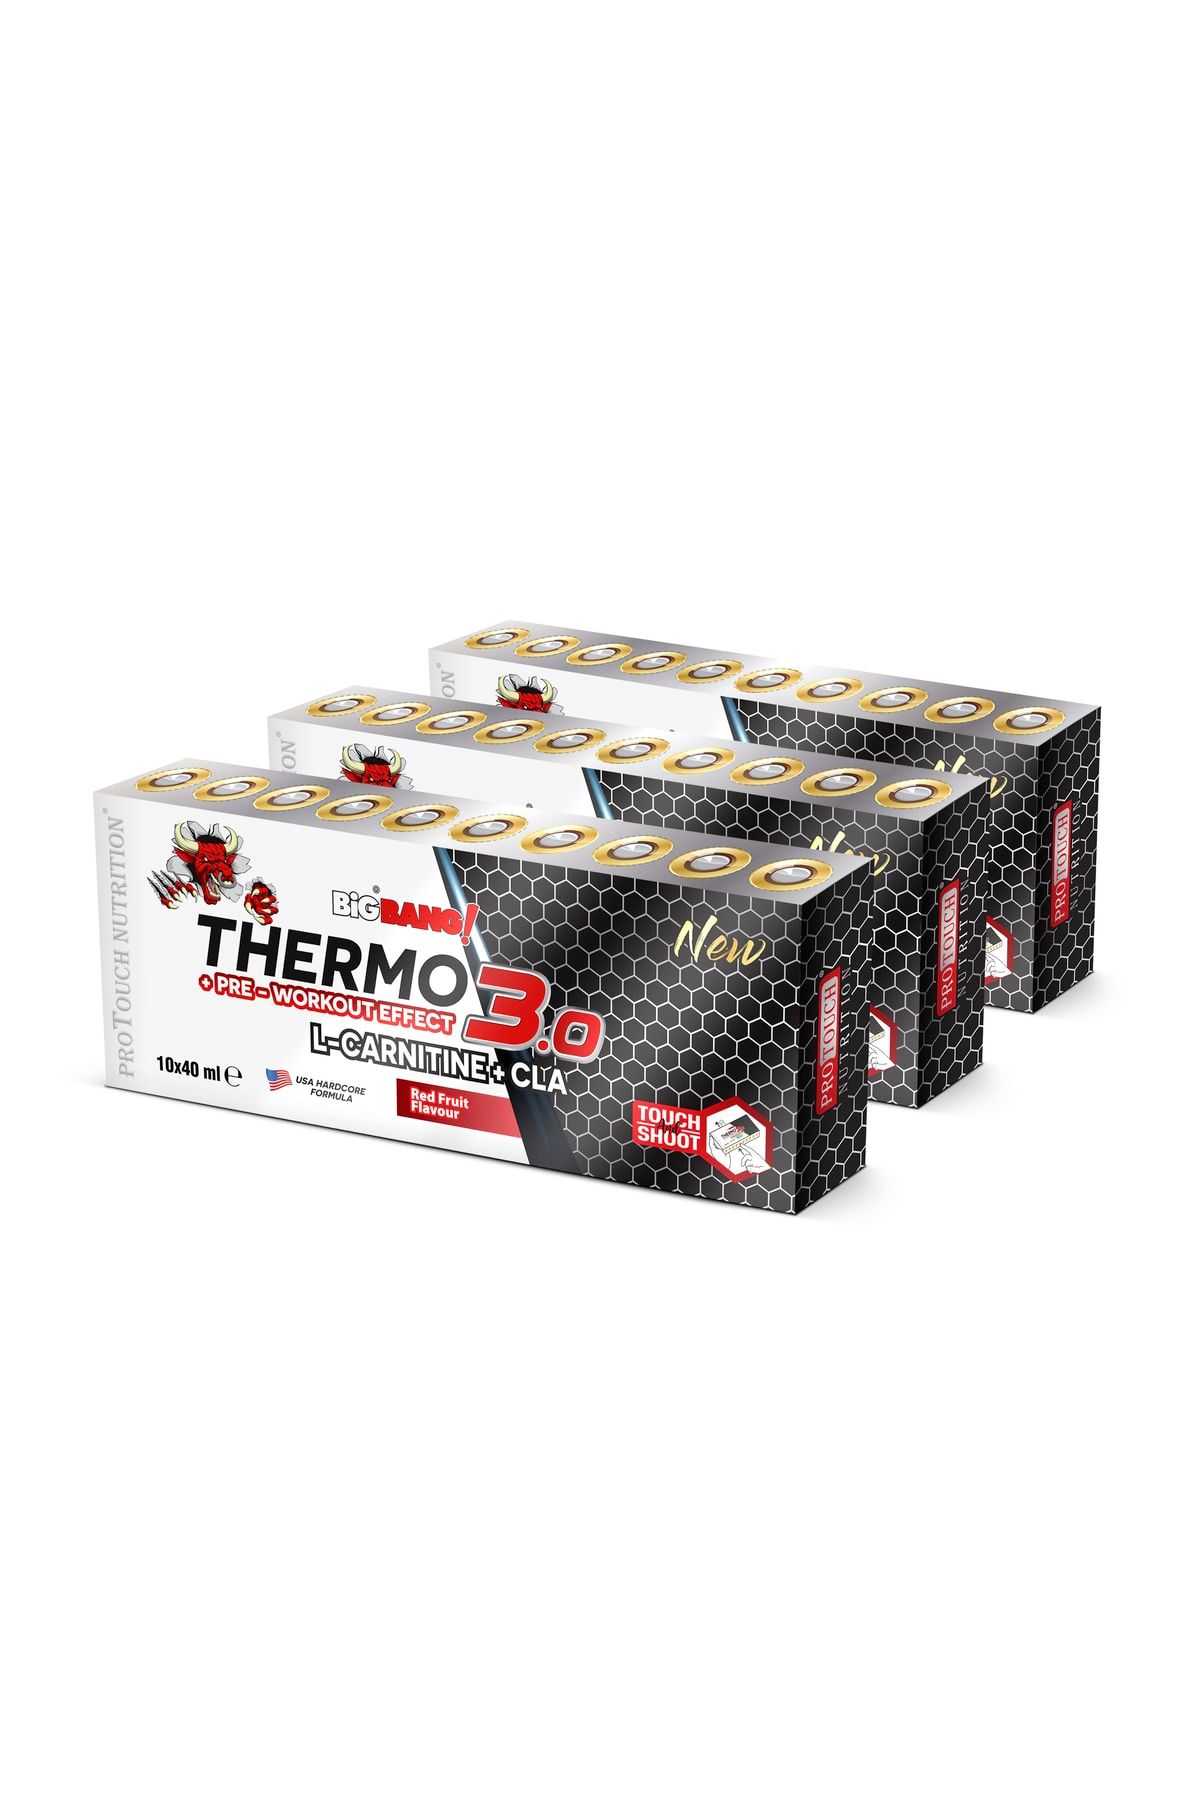 Protouch Nutrition Thermo 3.0 L-carnitine + Cla 30 Ampul